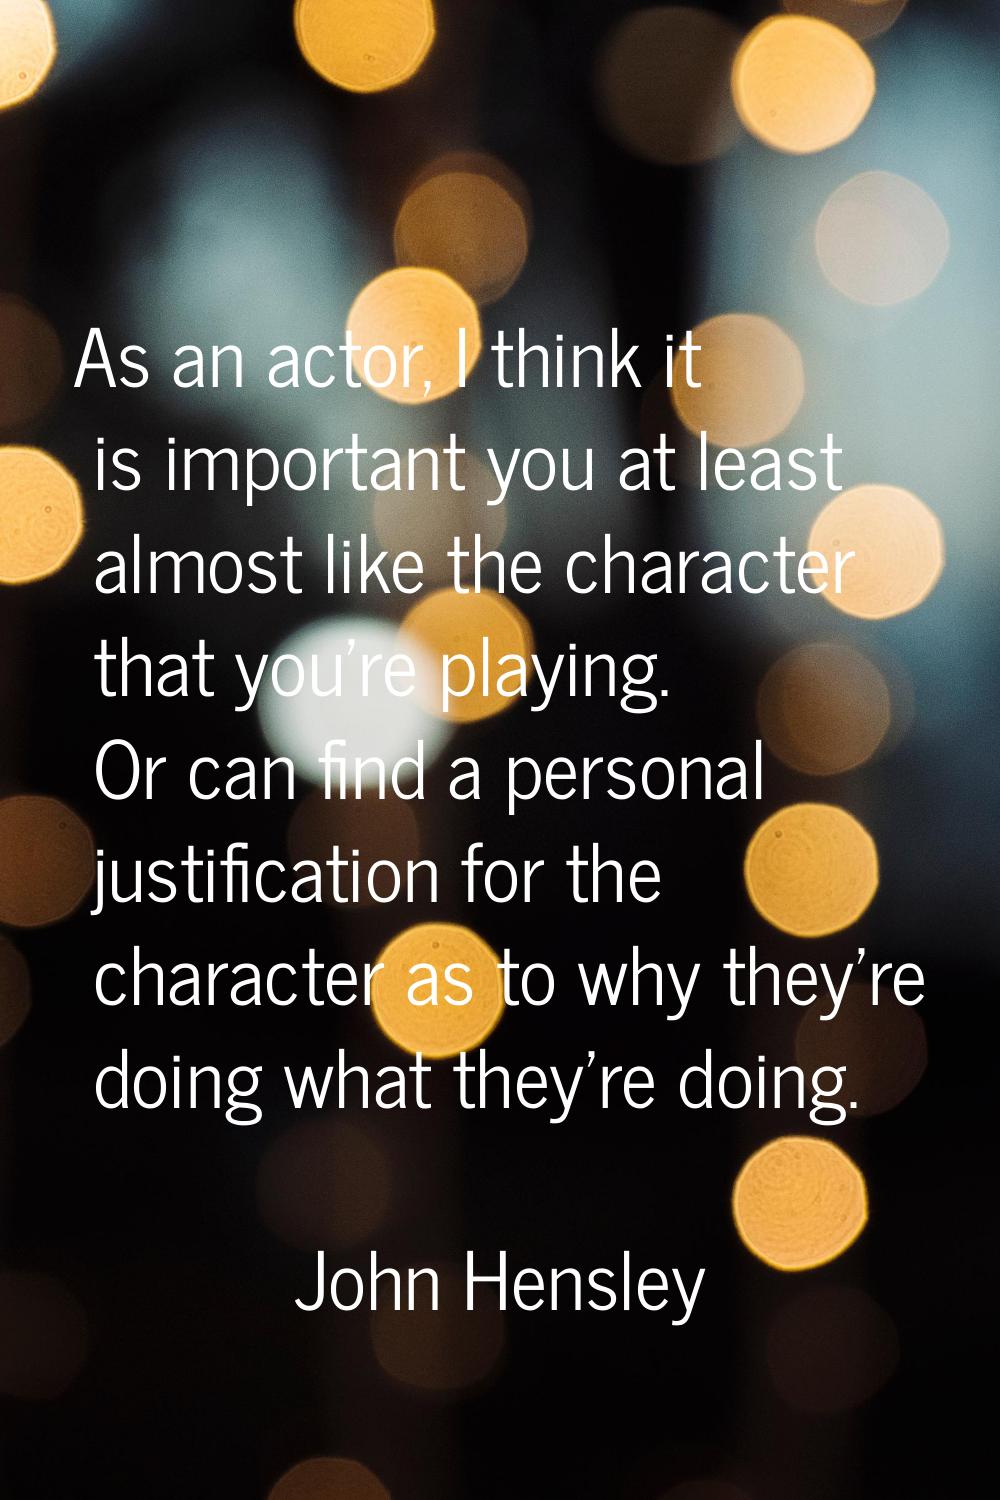 As an actor, I think it is important you at least almost like the character that you're playing. Or